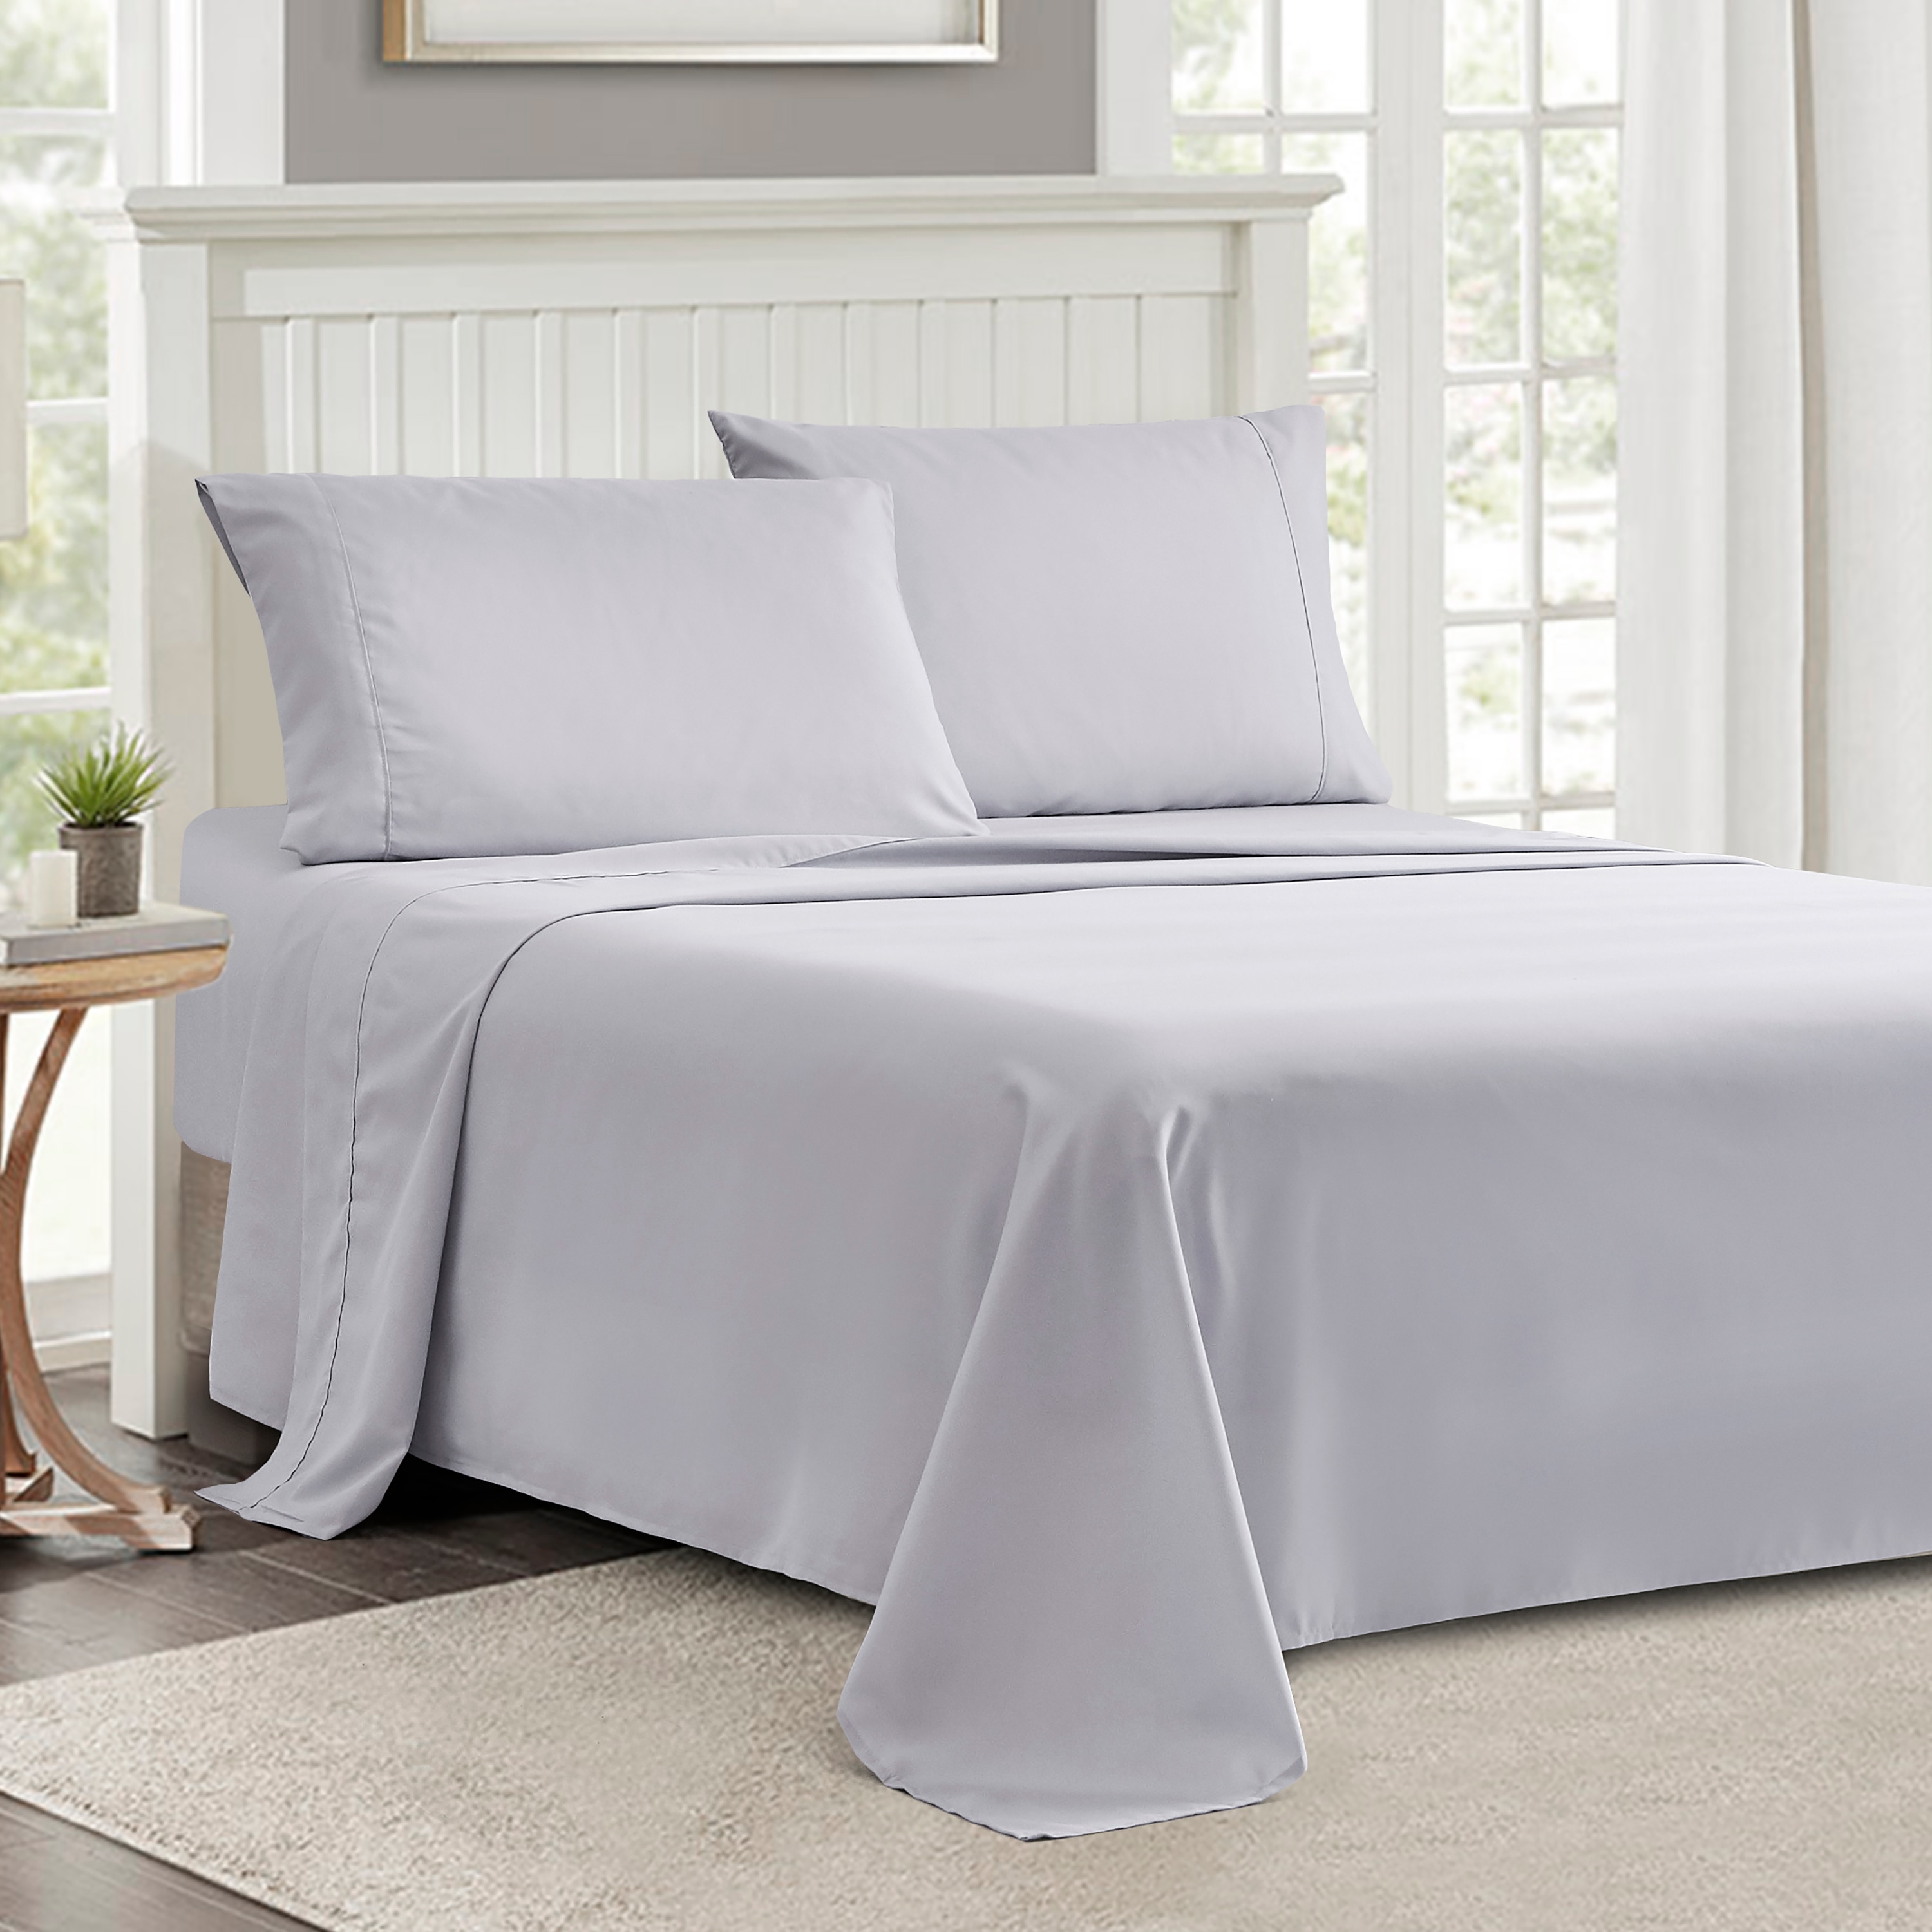 Silver Infused Bed Sheets Set - Made from Soft & Cooling 120 GSM Microfiber  - 4 Pieces Breathable Bedsheets with Thermoregulating Technology, Size